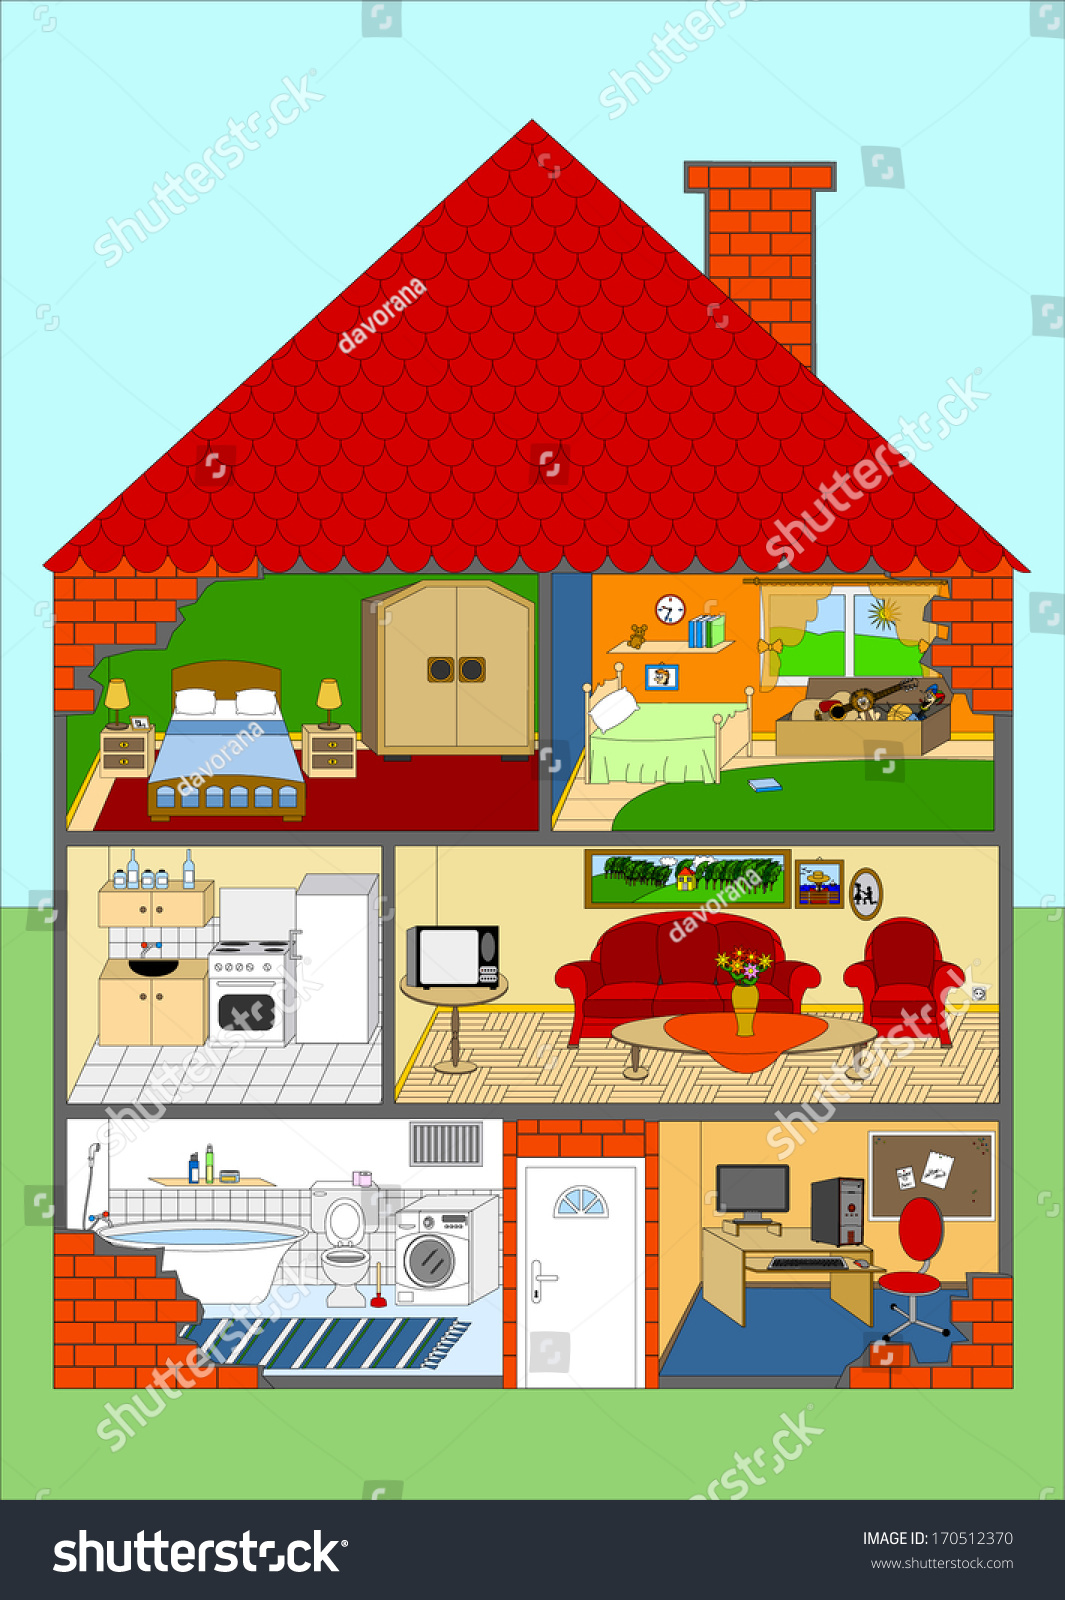 clipart of rooms in a house - photo #24